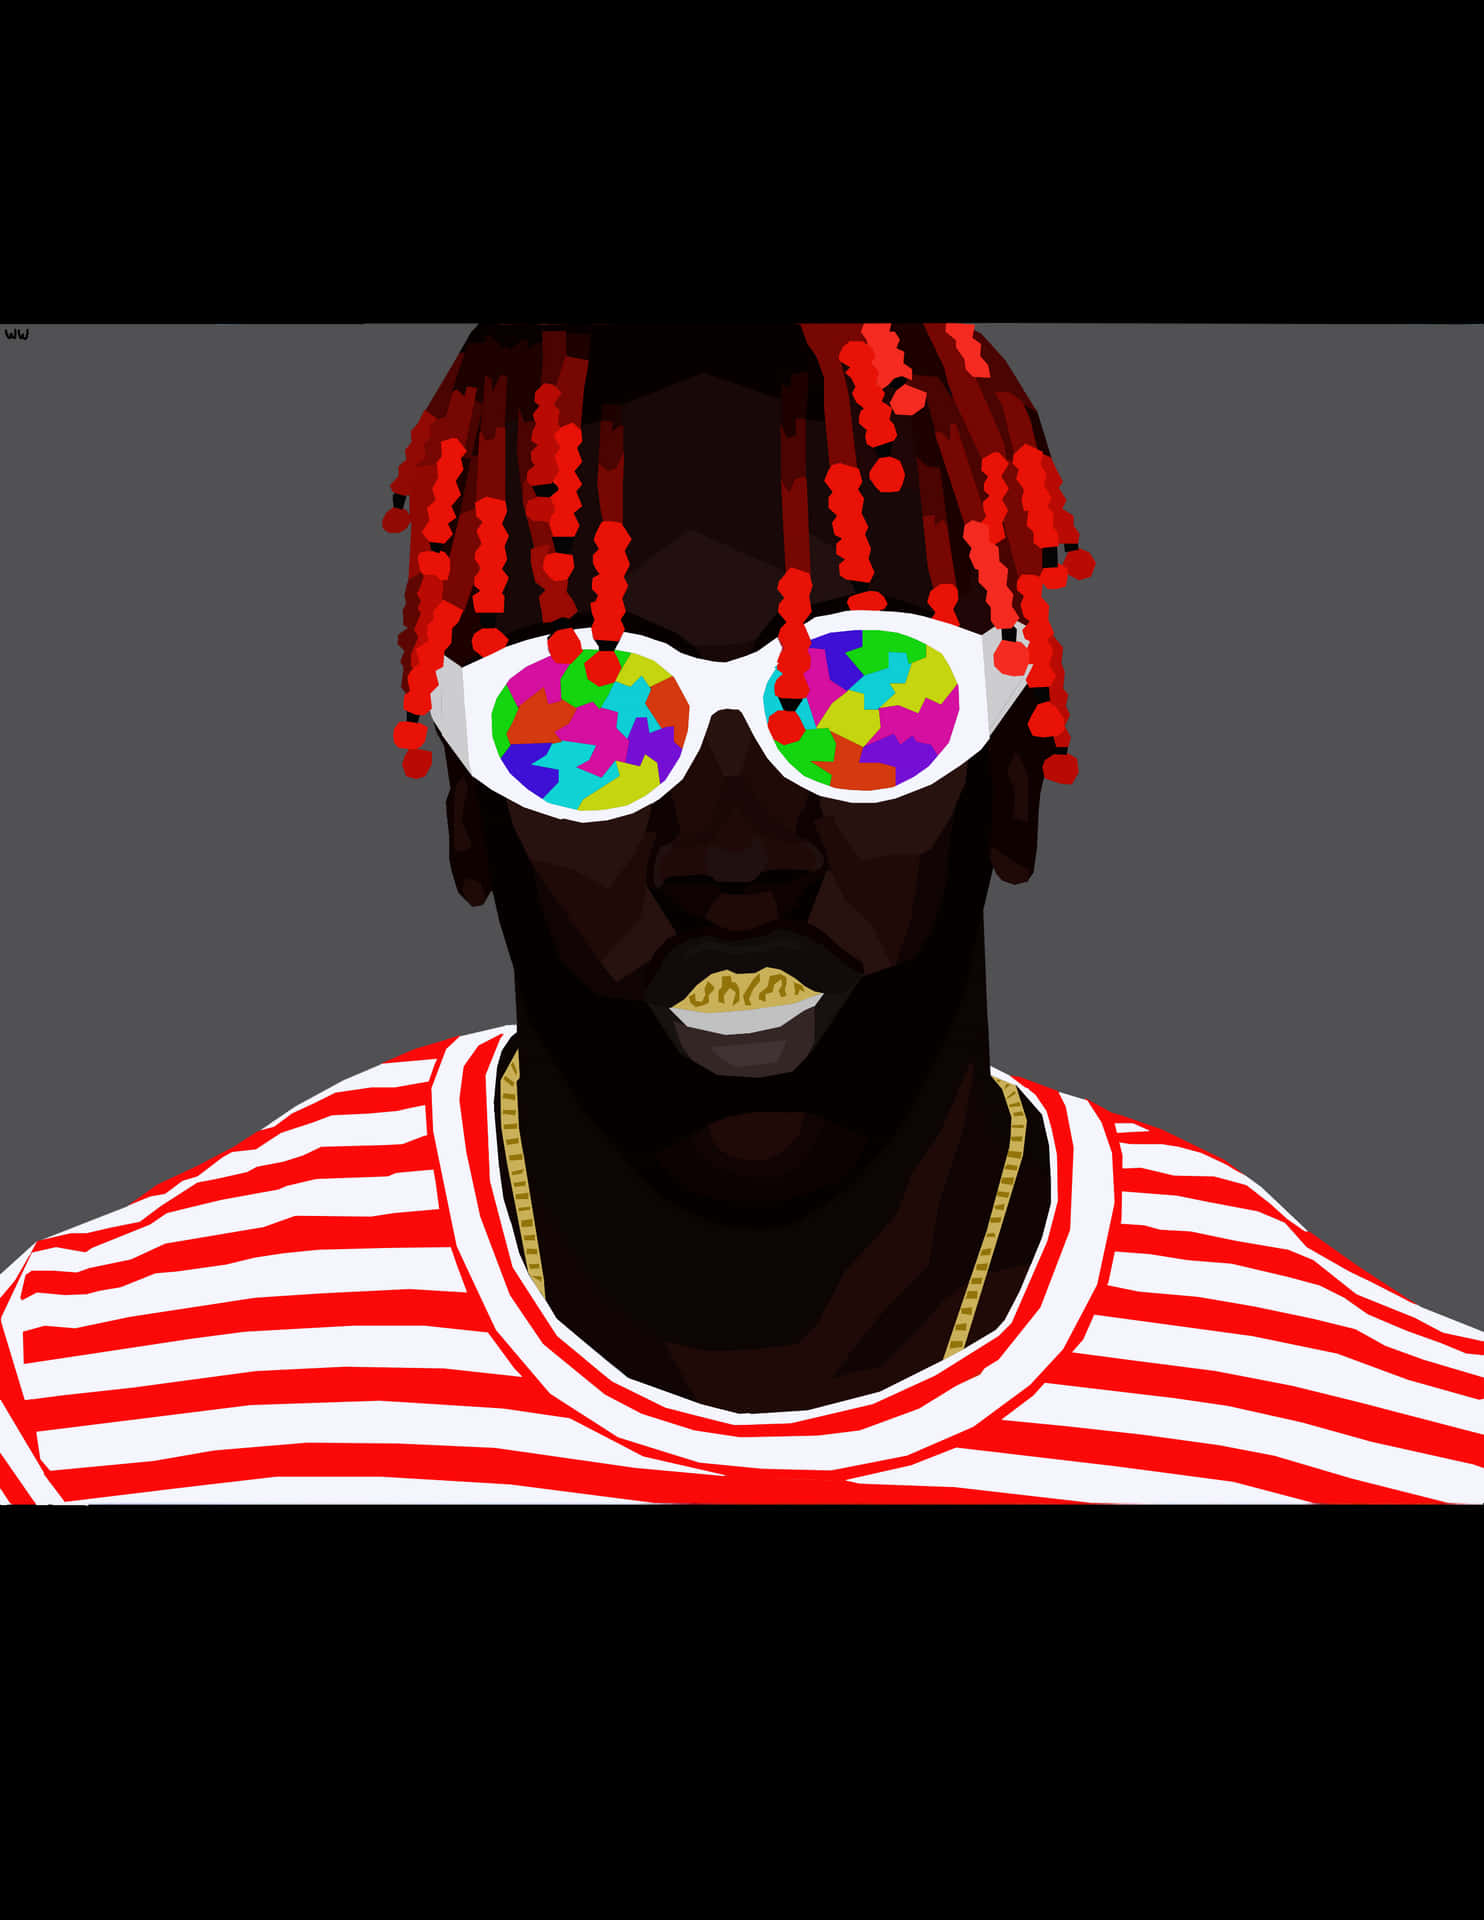 Lil Yachty on stage Wallpaper